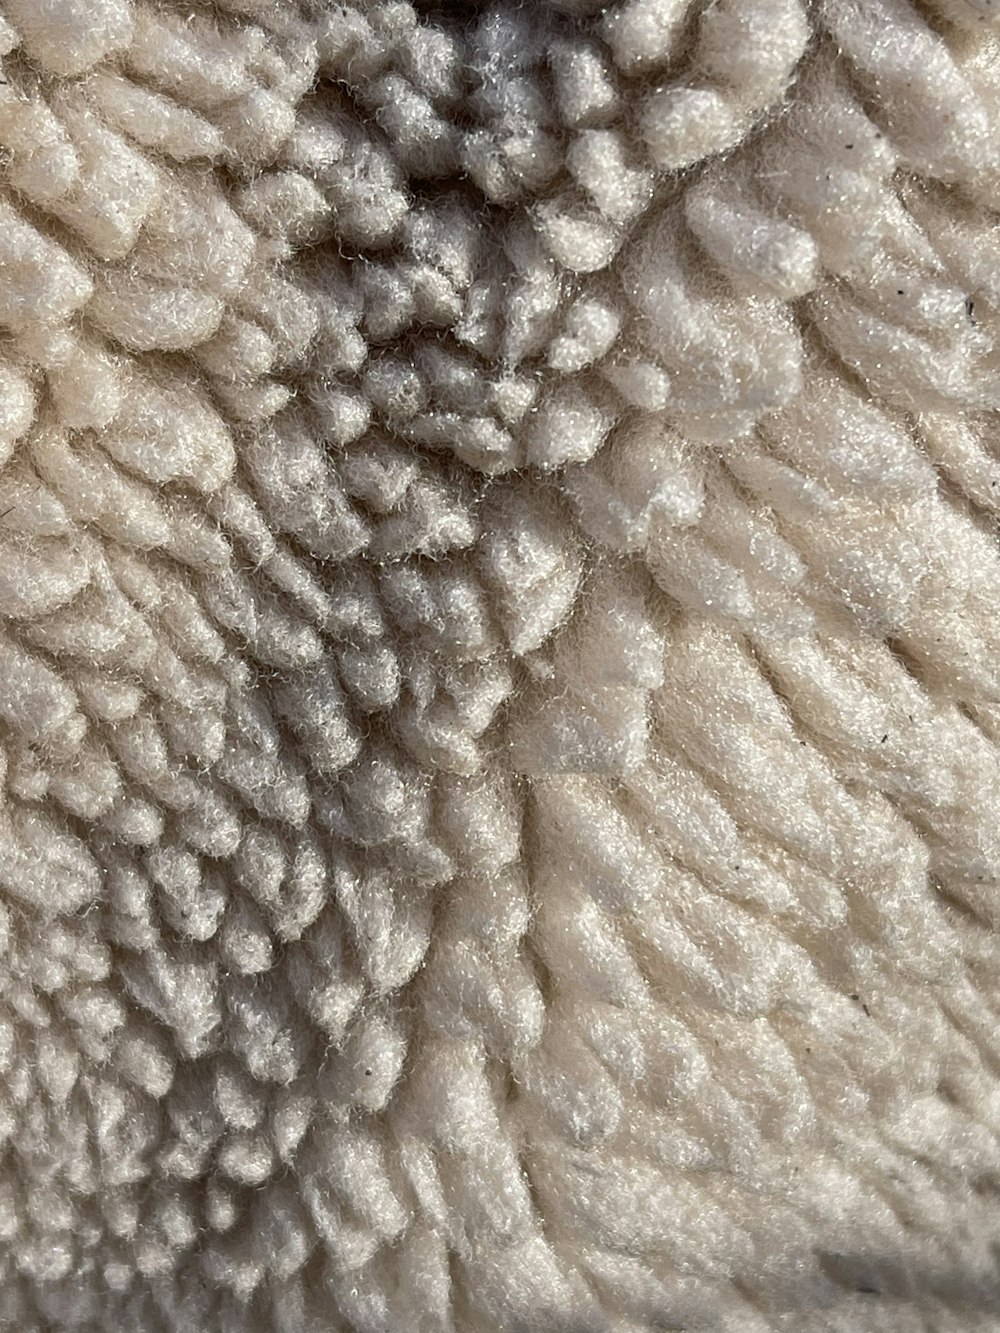 a close up view of a sheep's wool